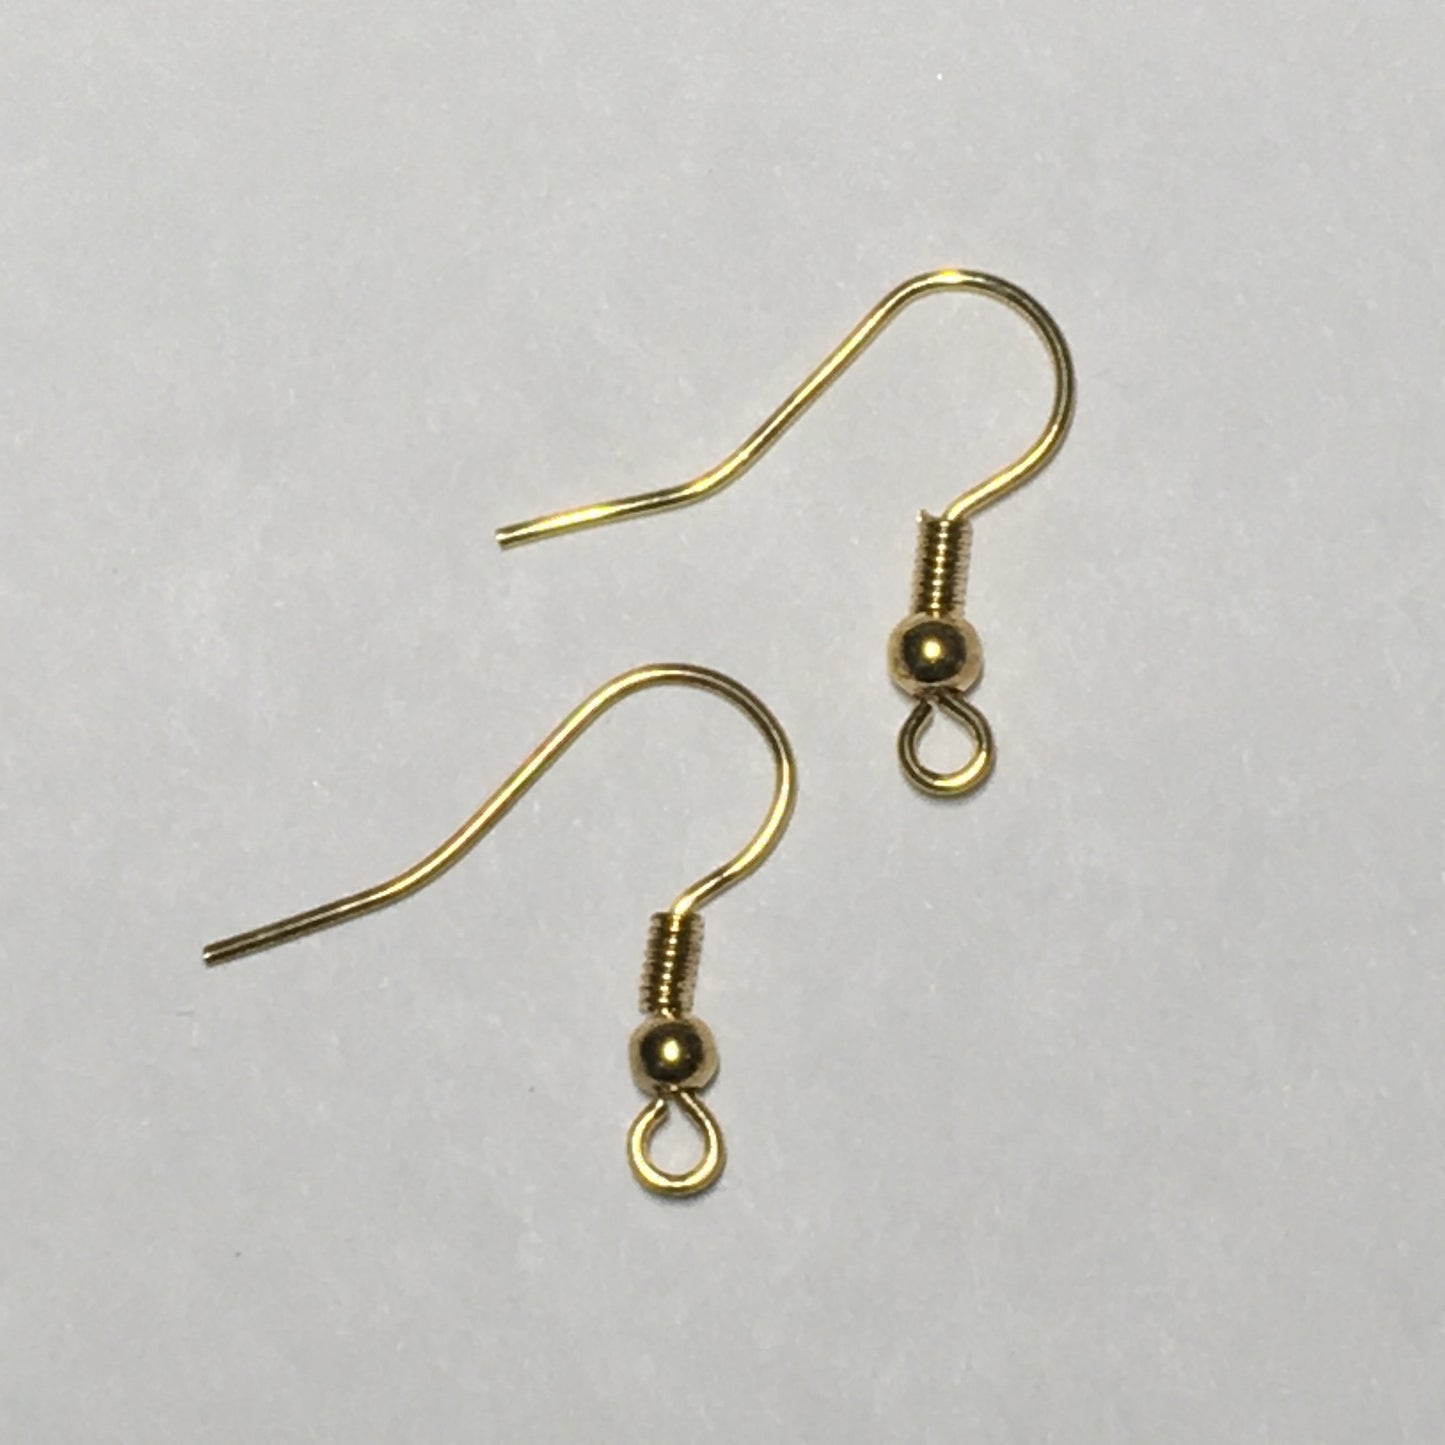 21-Gauge 19 mm Gold French Fish Hook Ear Wires - 1, 5 or 10 Pair